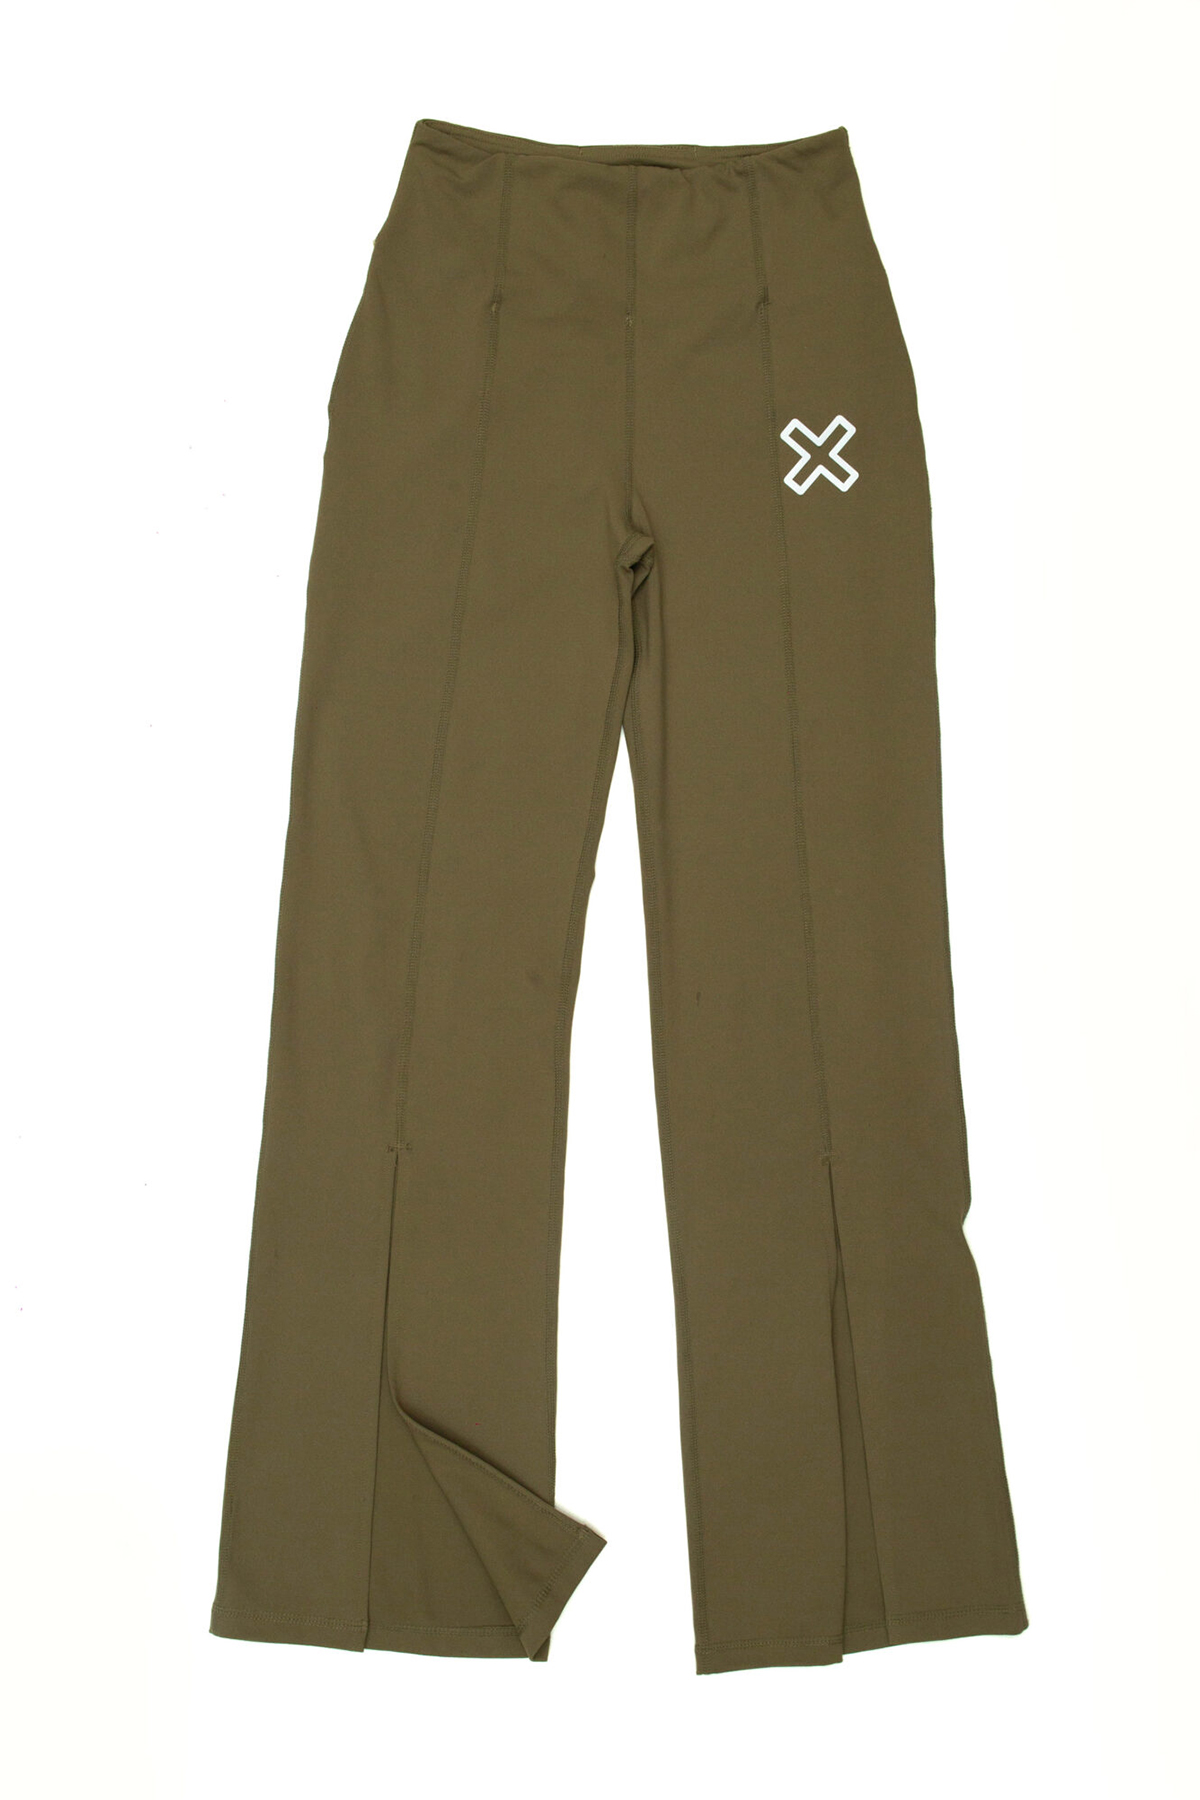 Time-Out-X-Flare-Yoga-Ankle-Slit-Pants—Olive-Green—Front